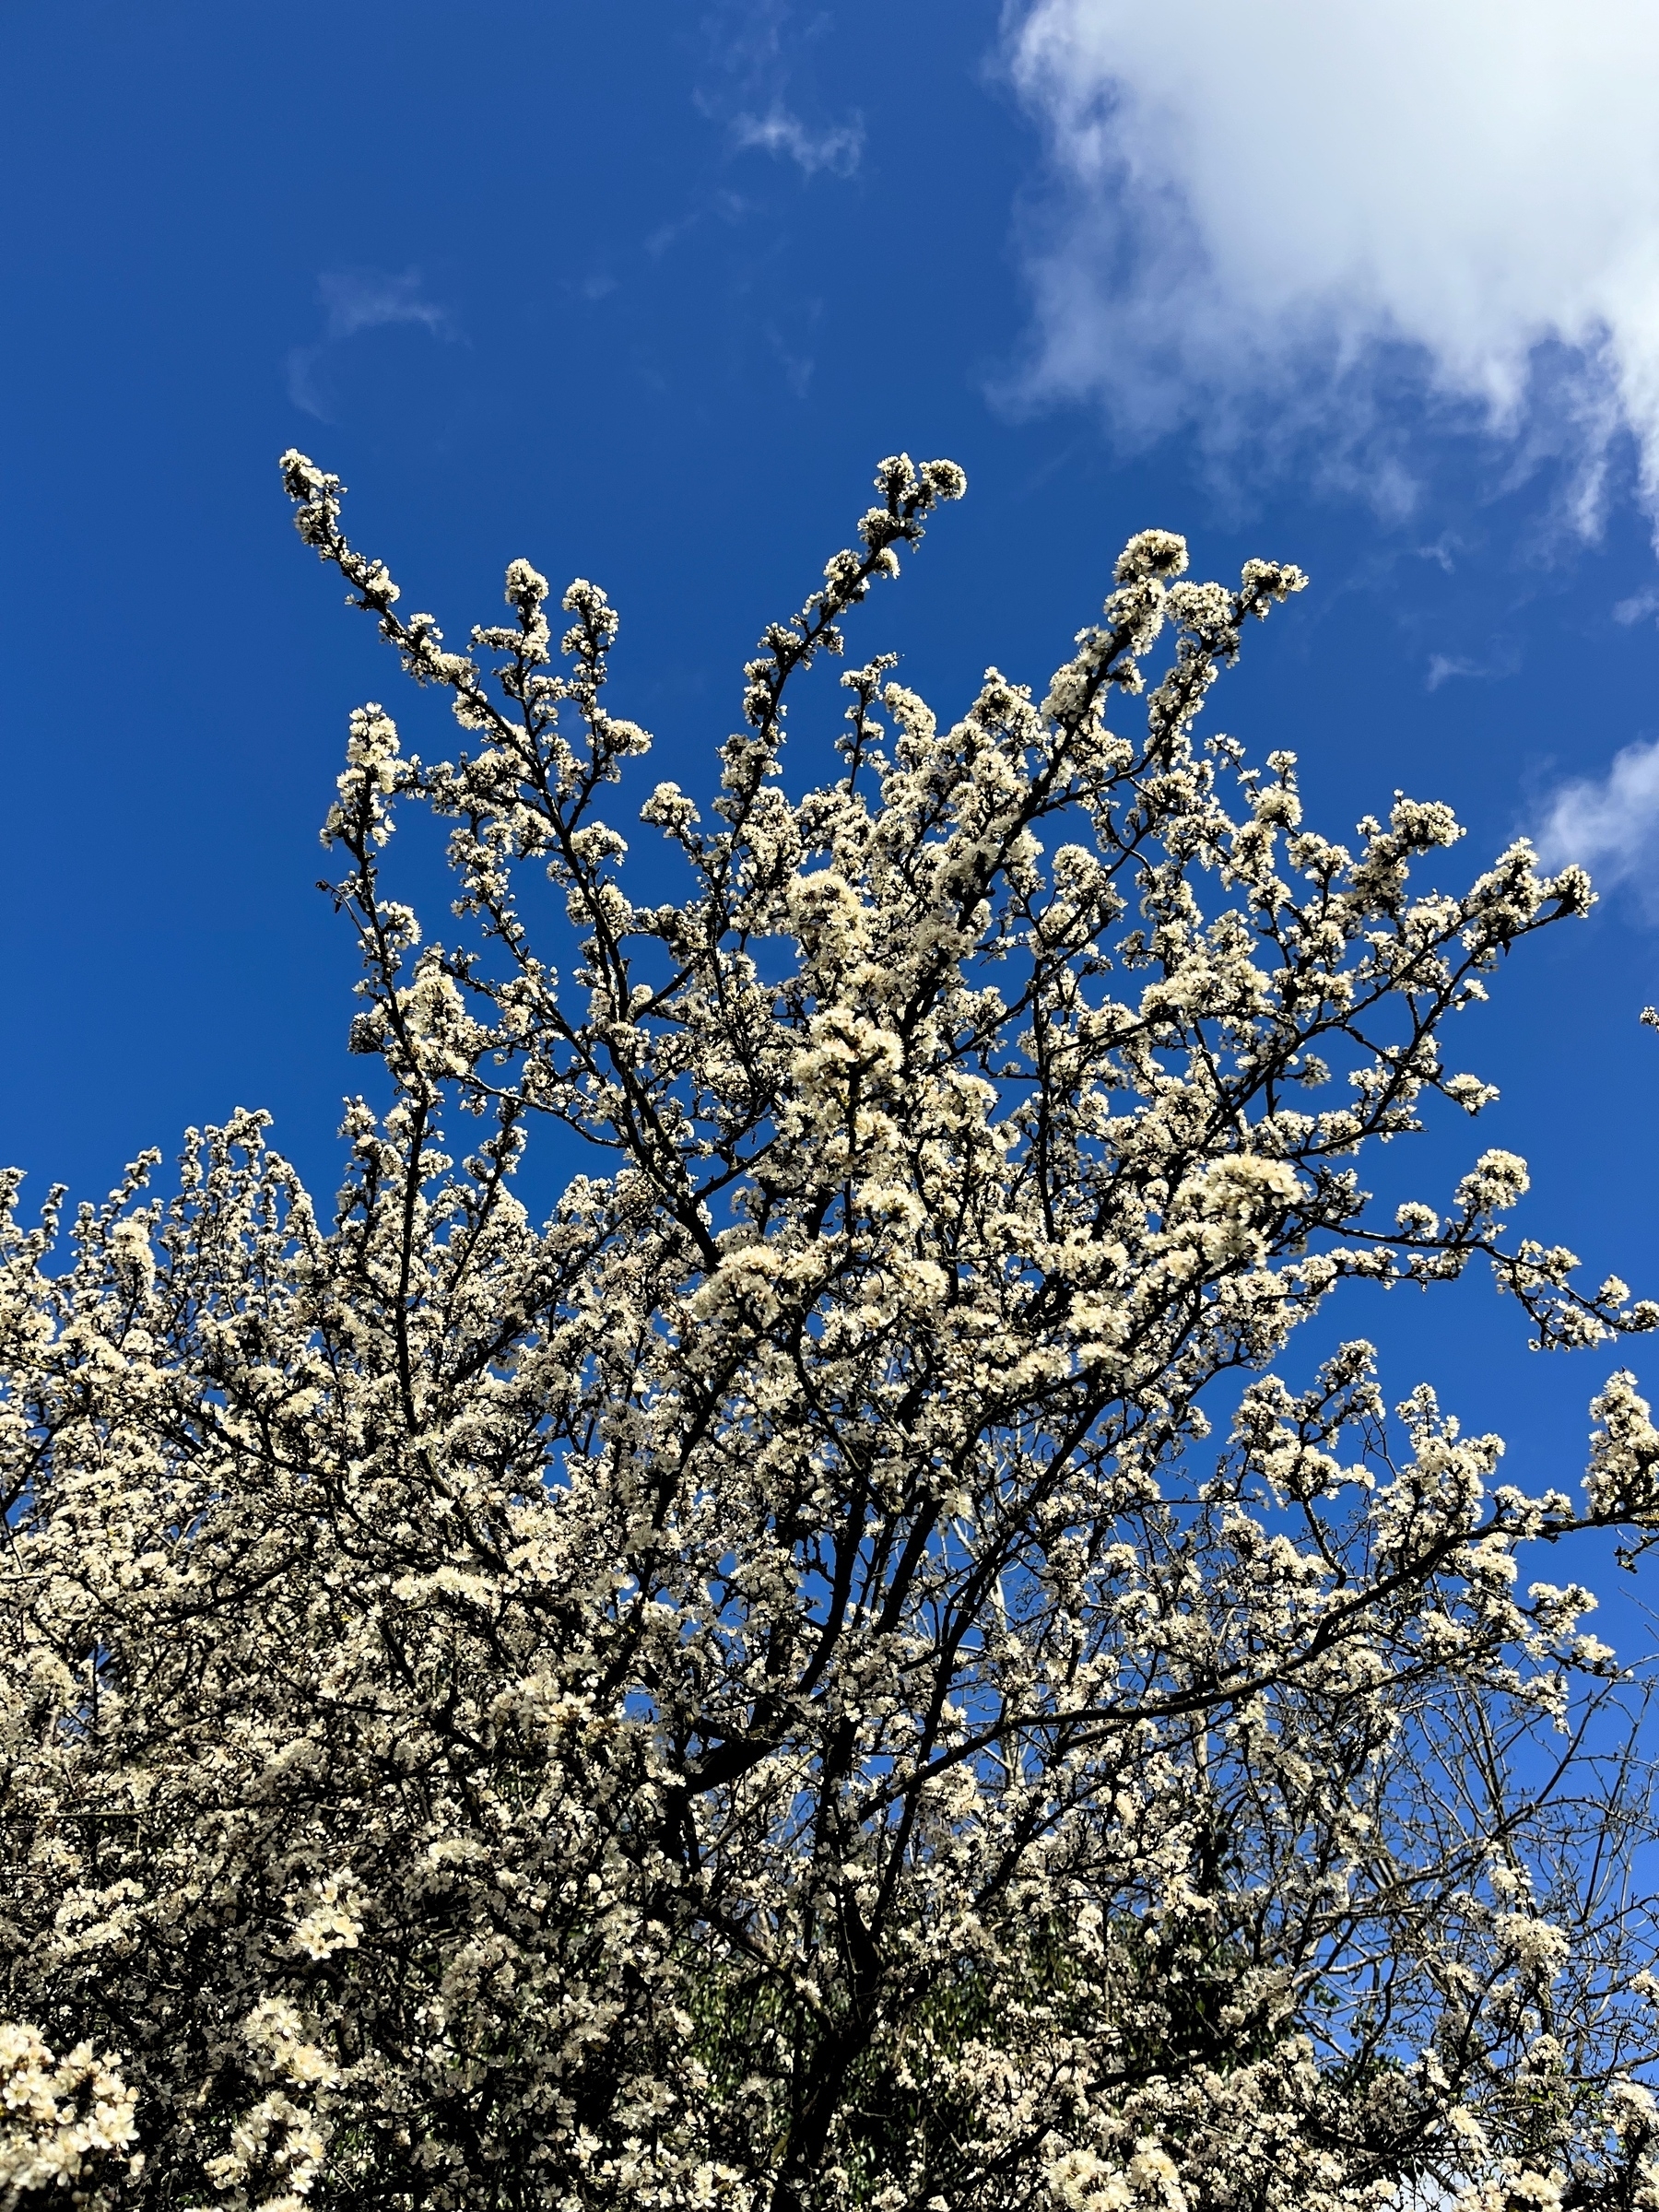 Branches of blackthorn in blossom viewed from below against a deep blue sky.